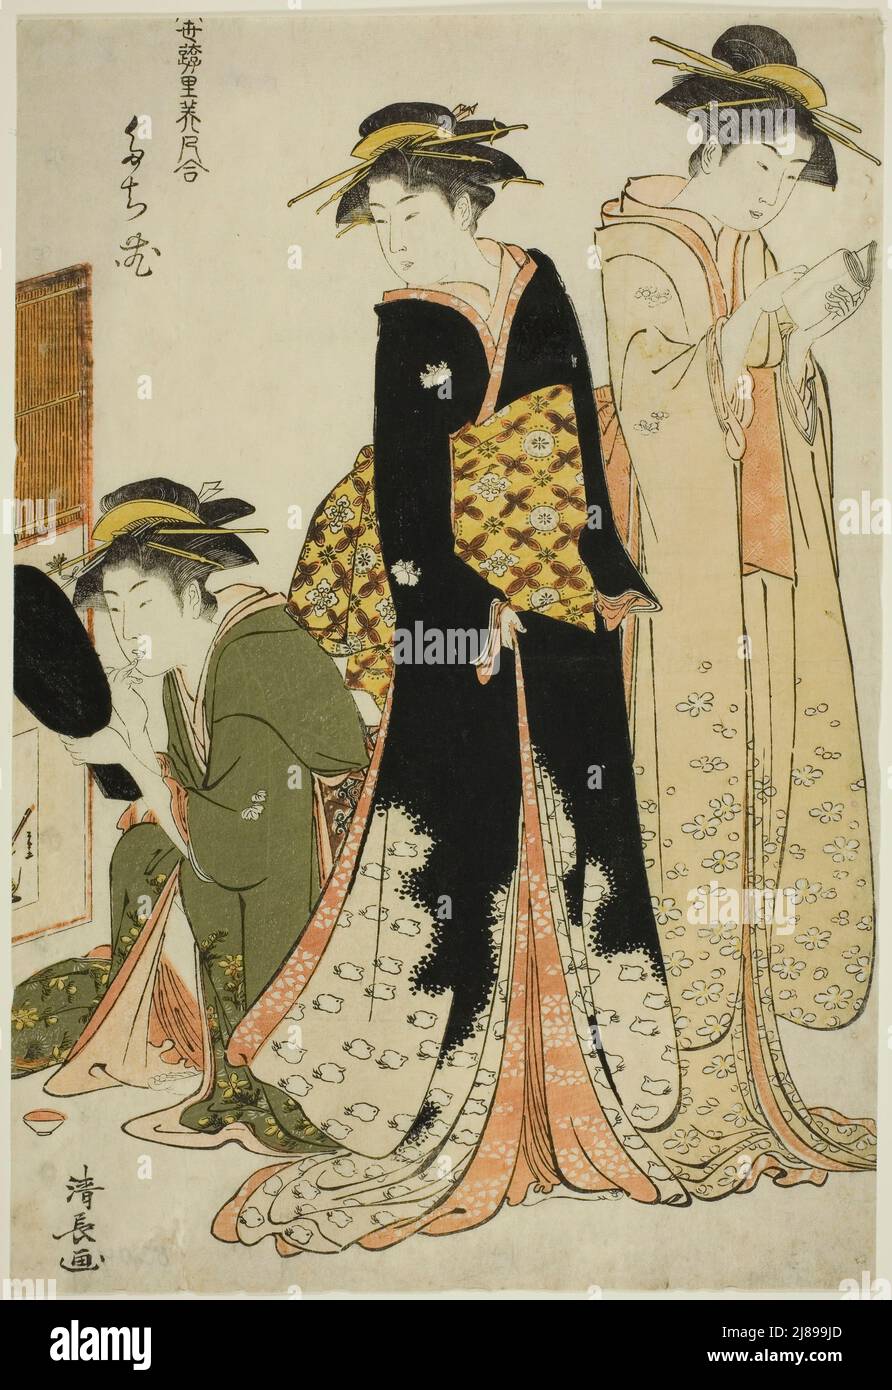 Entertainers of the Tachibana, from the series &quot;A Collection of Contemporary Beauties of the Pleasure Quarters (Tosei yuri bijin awase)&quot;, c. 1784. Stock Photo